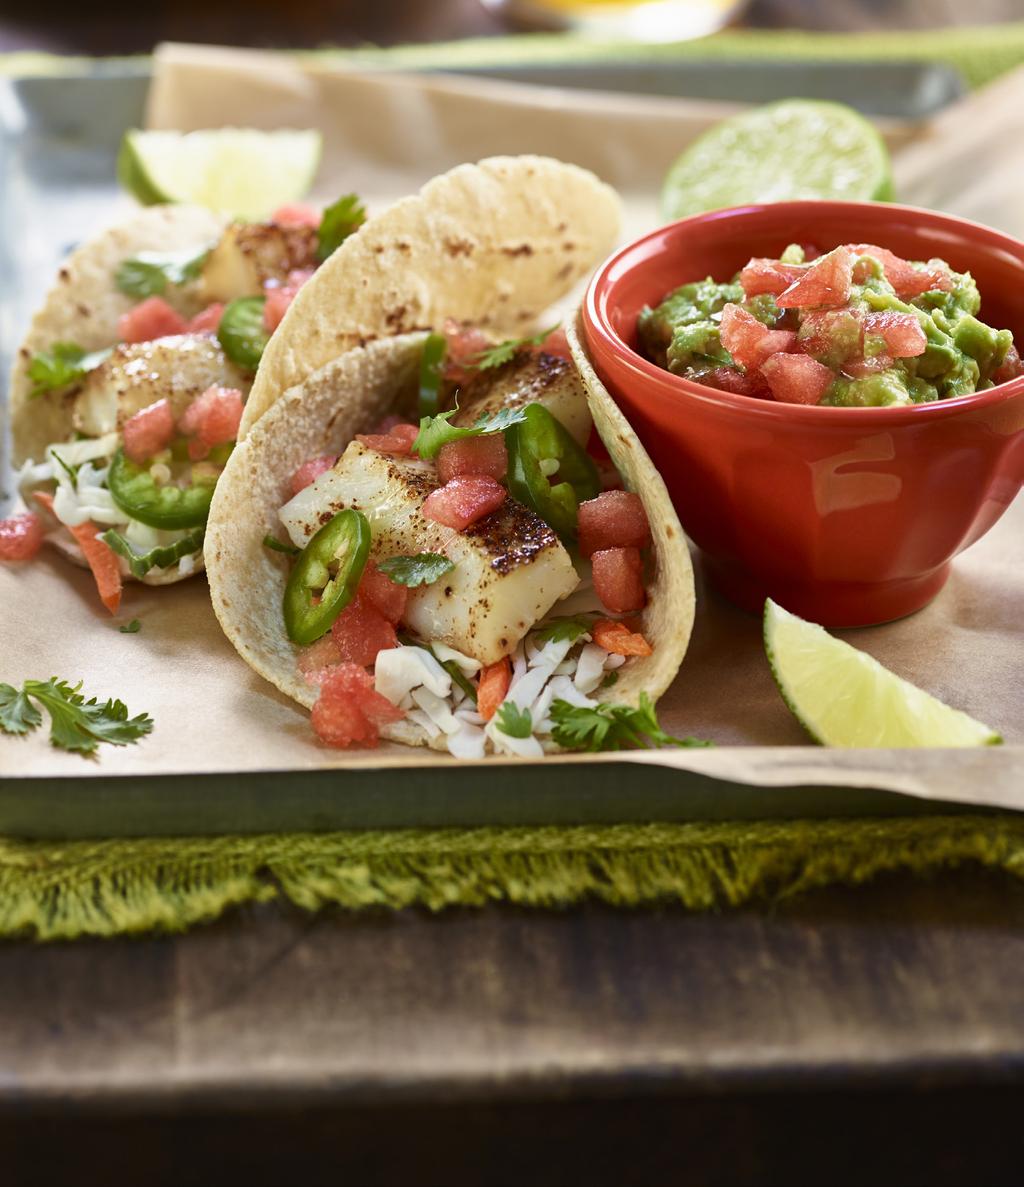 These tacos take only minutes to make, yet are so yummy (and packed with vitamins, minerals, and fiber) the whole family will love to build their own.